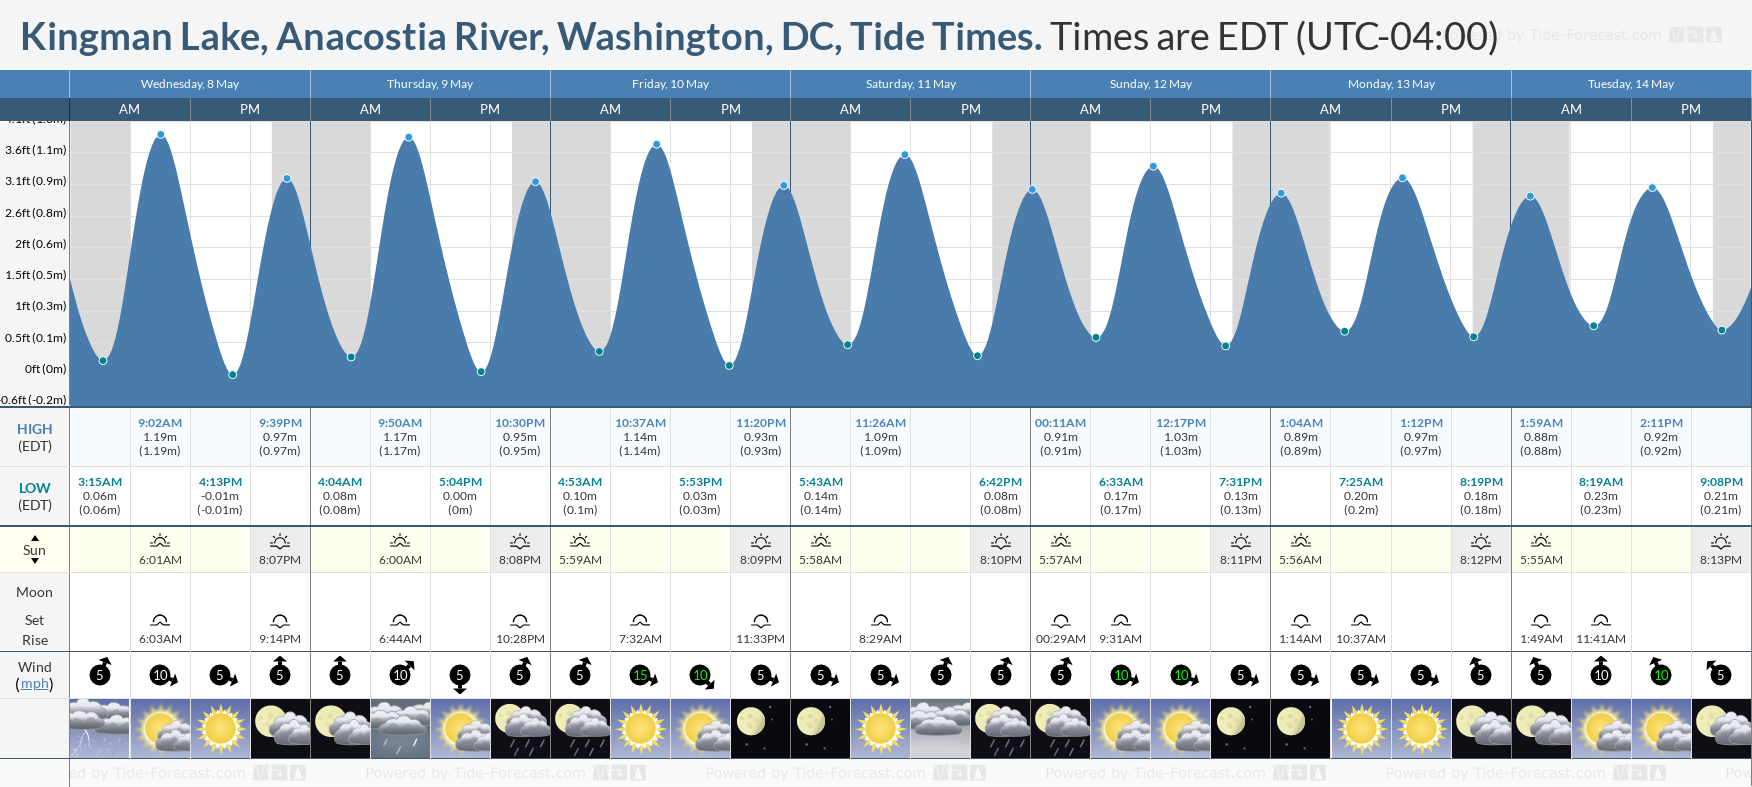 Kingman Lake, Anacostia River, Washington, DC Tide Chart including high and low tide times for the next 7 days